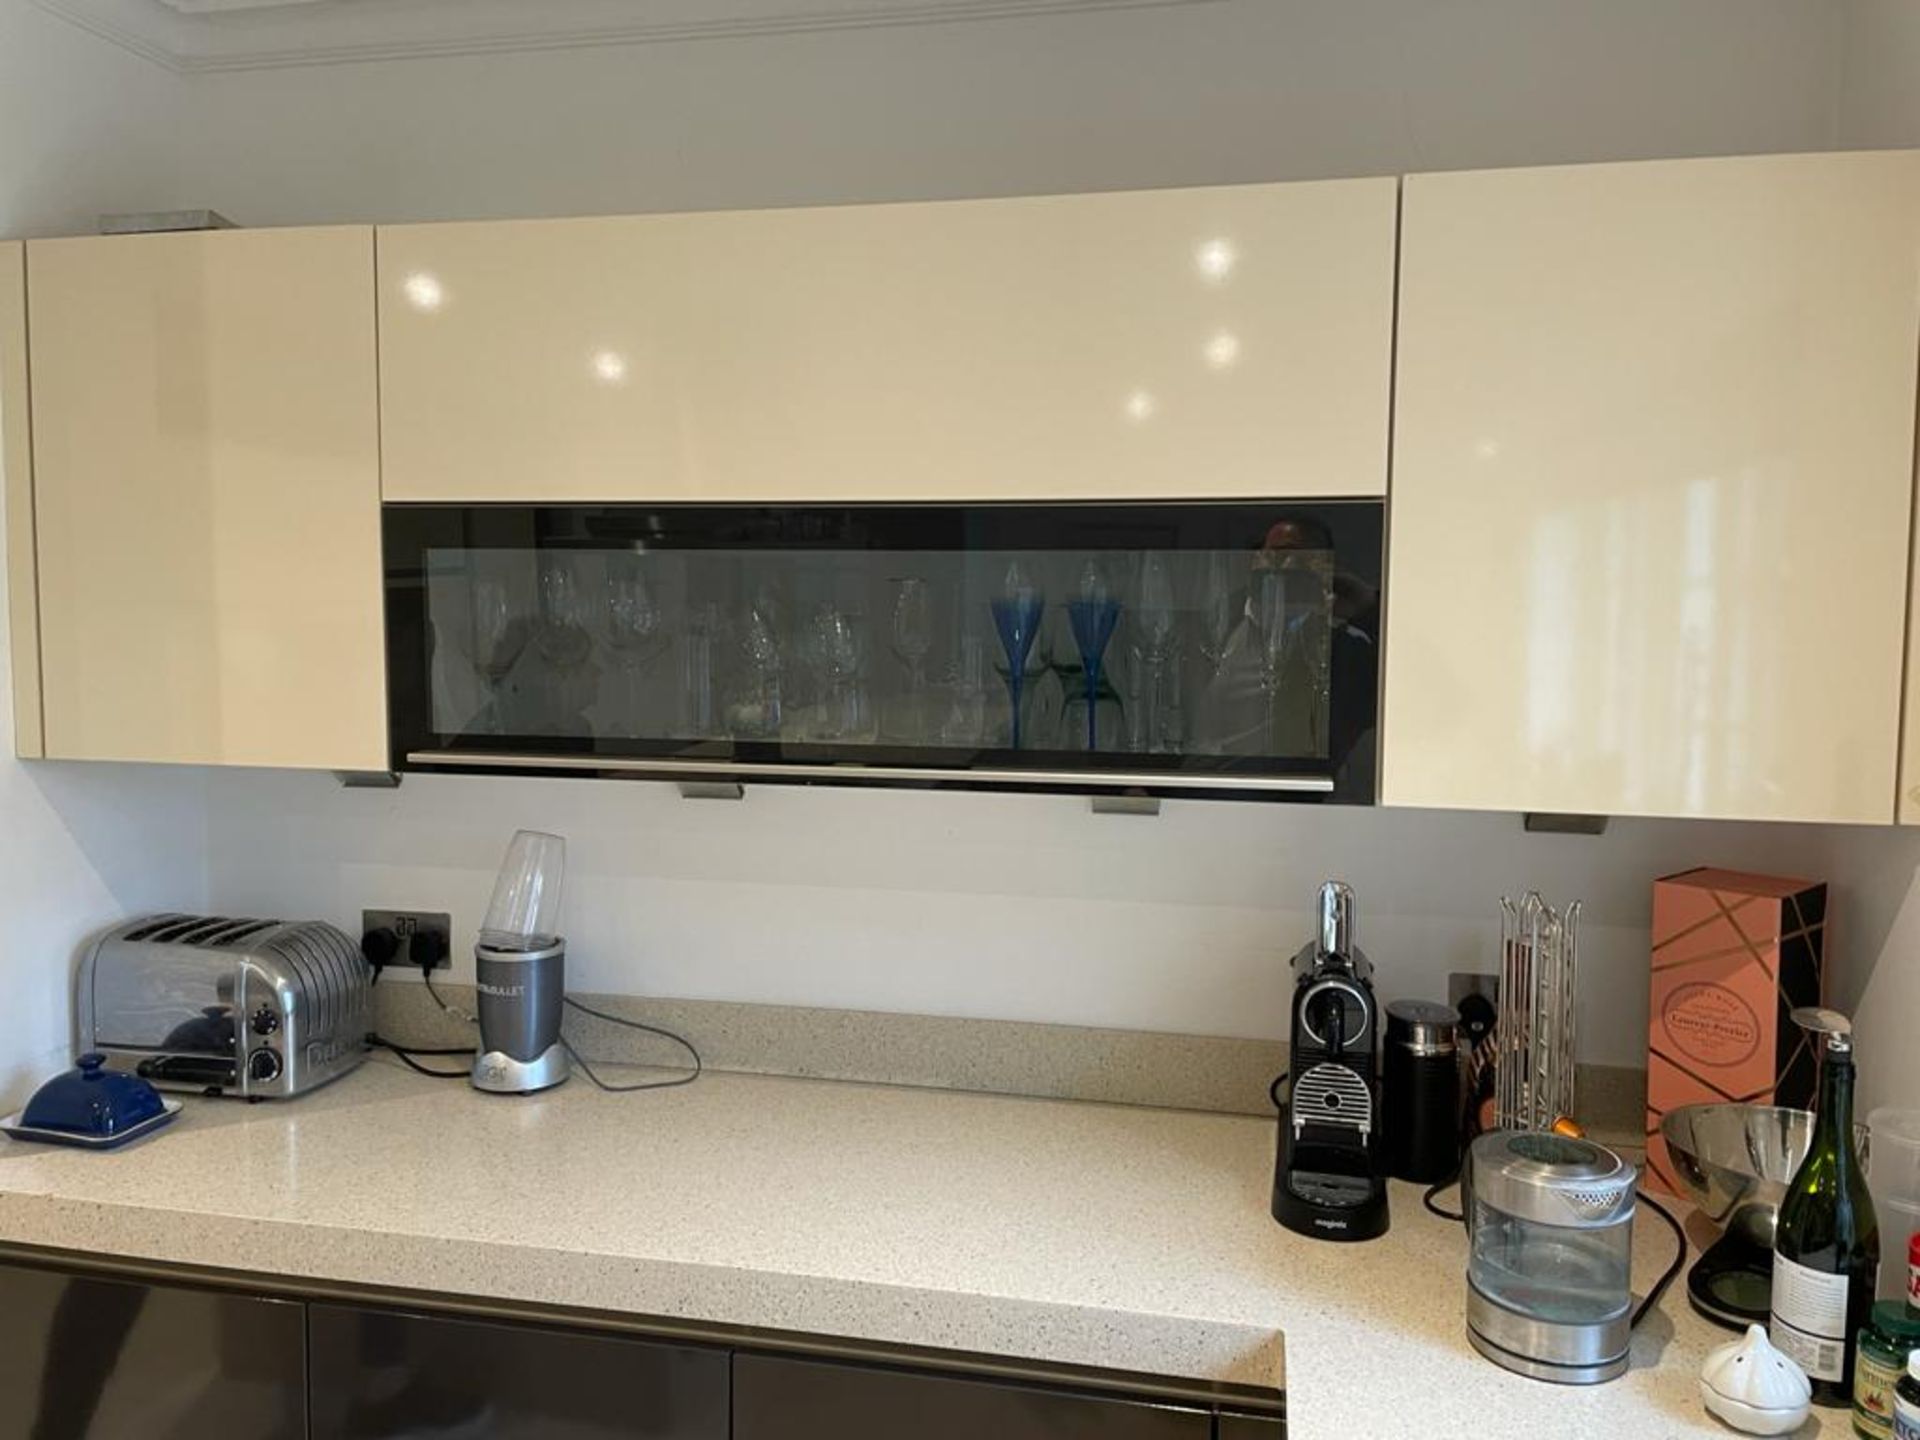 1 x Bespoke SIEMATIC Fitted S2 Handless Kitchen With High End Integrated Gaggenau Appliances - Image 16 of 76